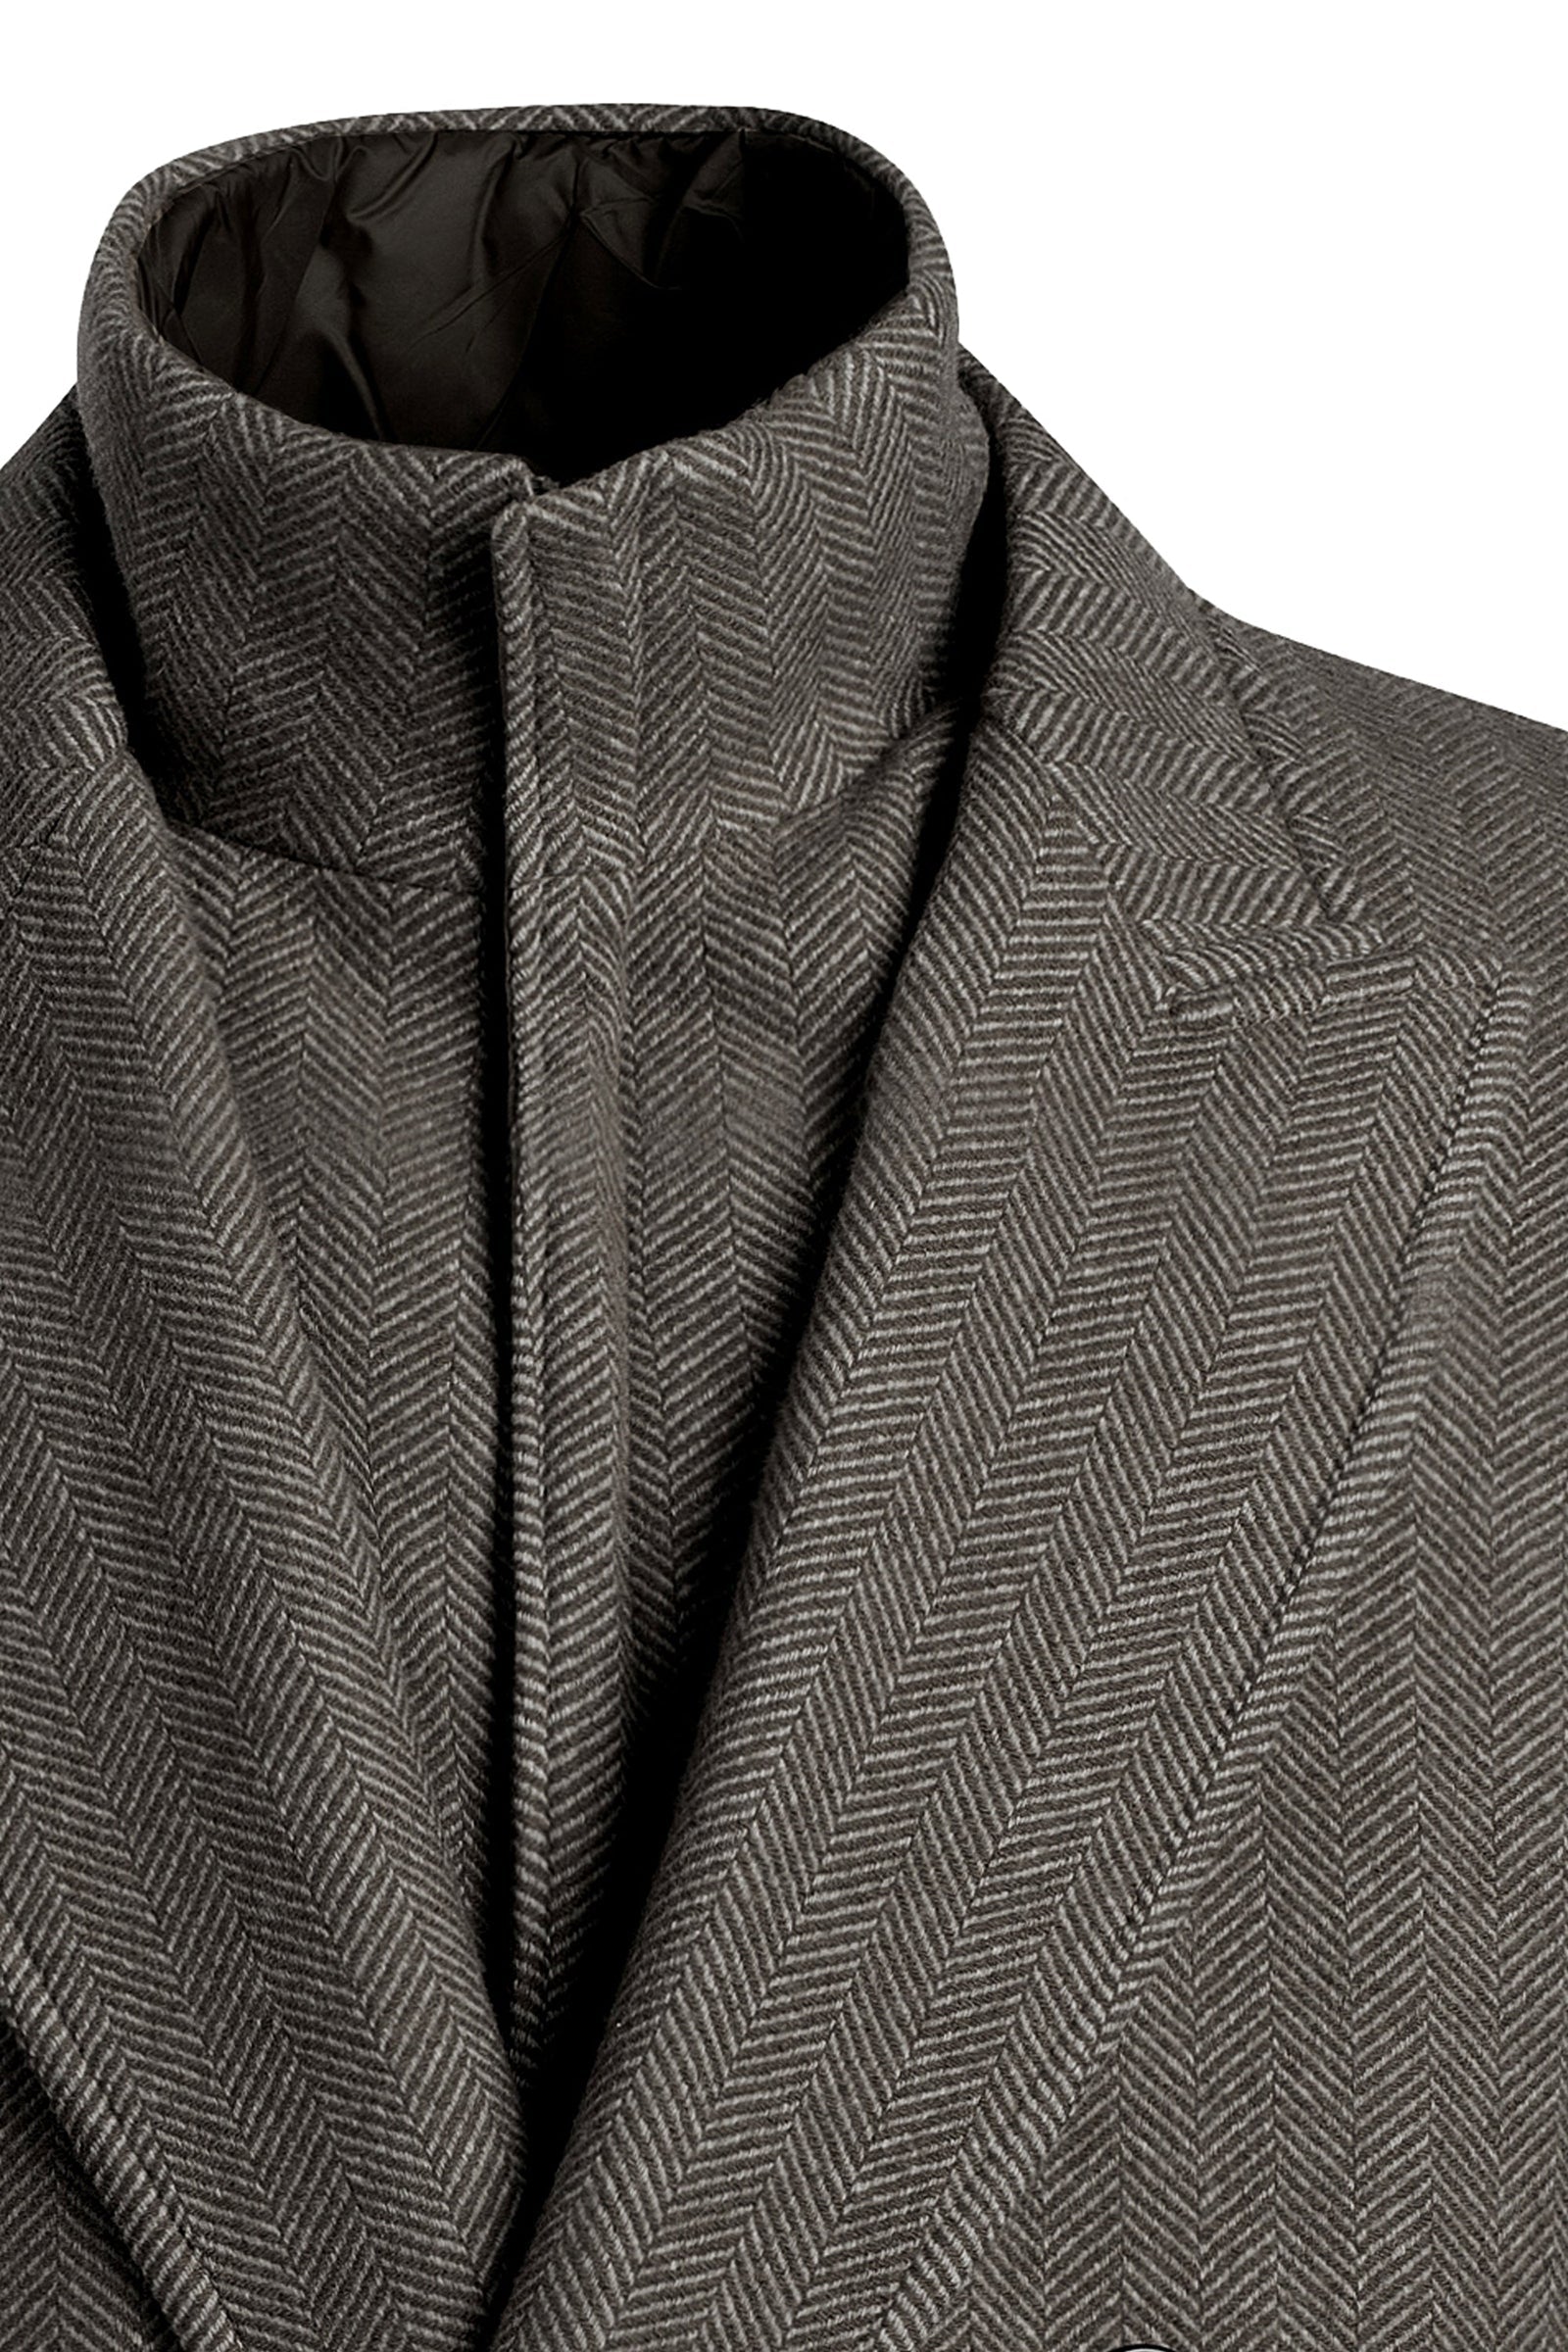 Cardinal of Canada-CA - Townsend charcoal herringbone top coat wool and cashmere 41.5 inch length